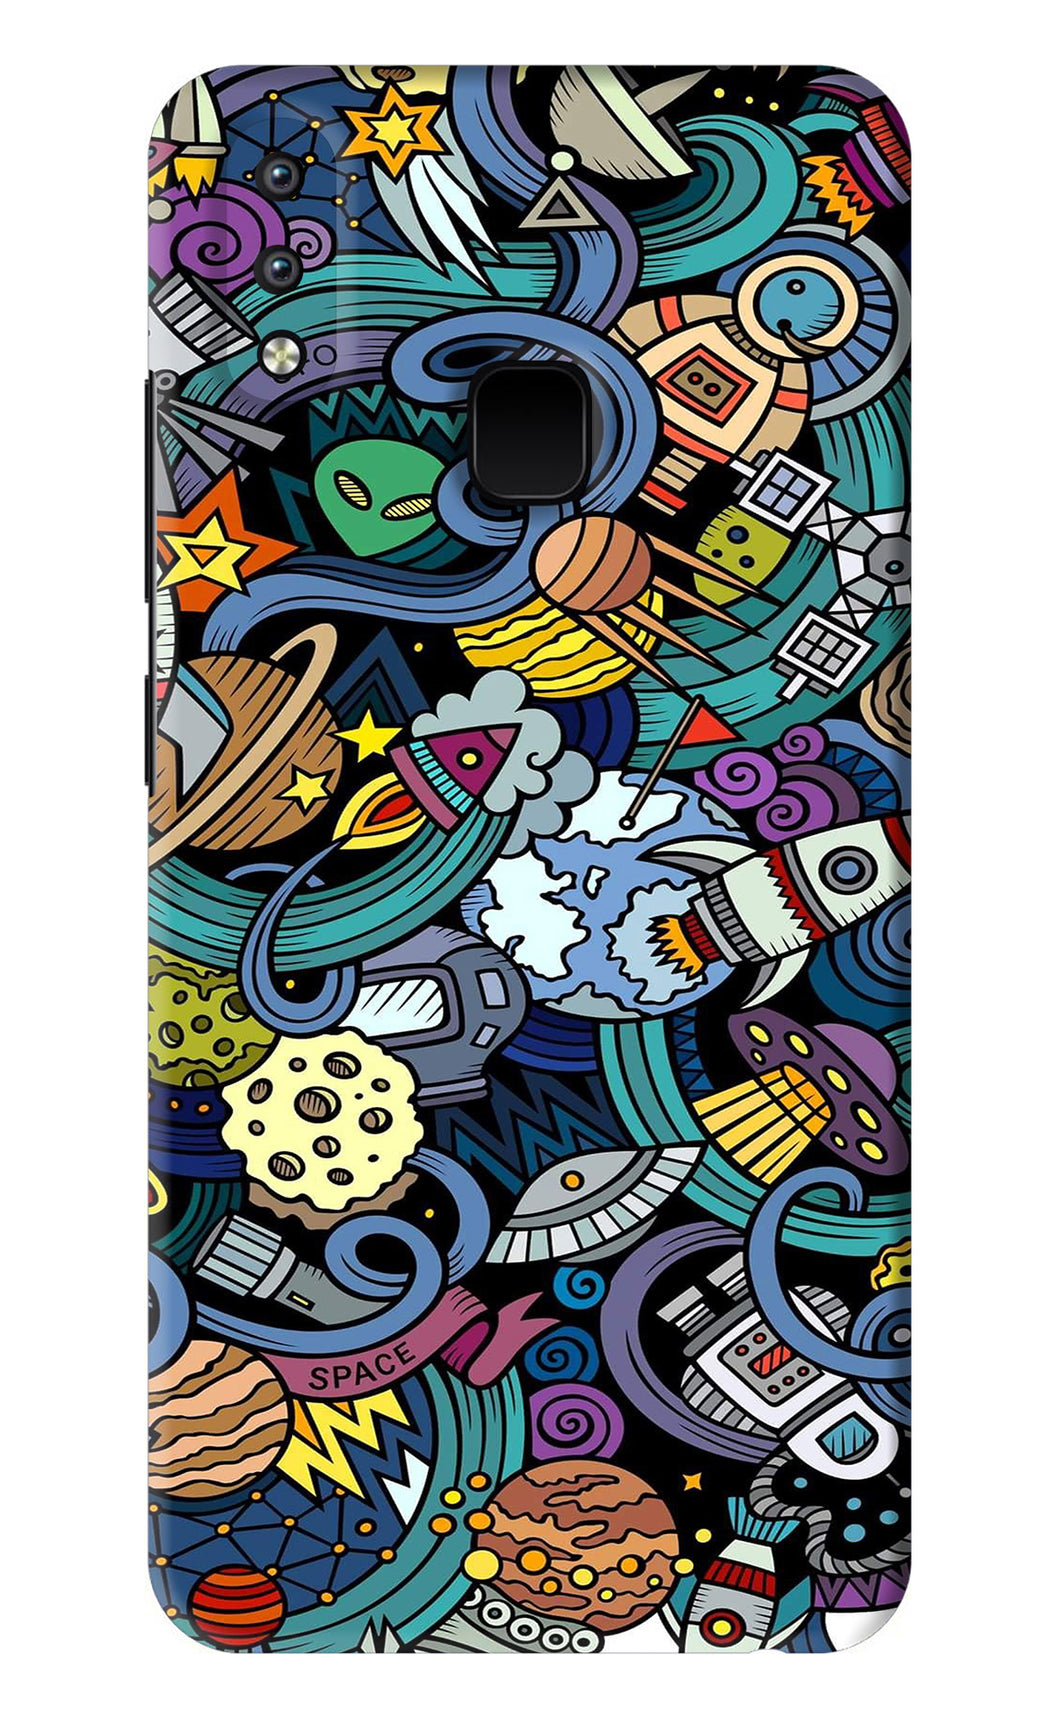 Space Abstract Vivo Y93 Back Skin Wrap